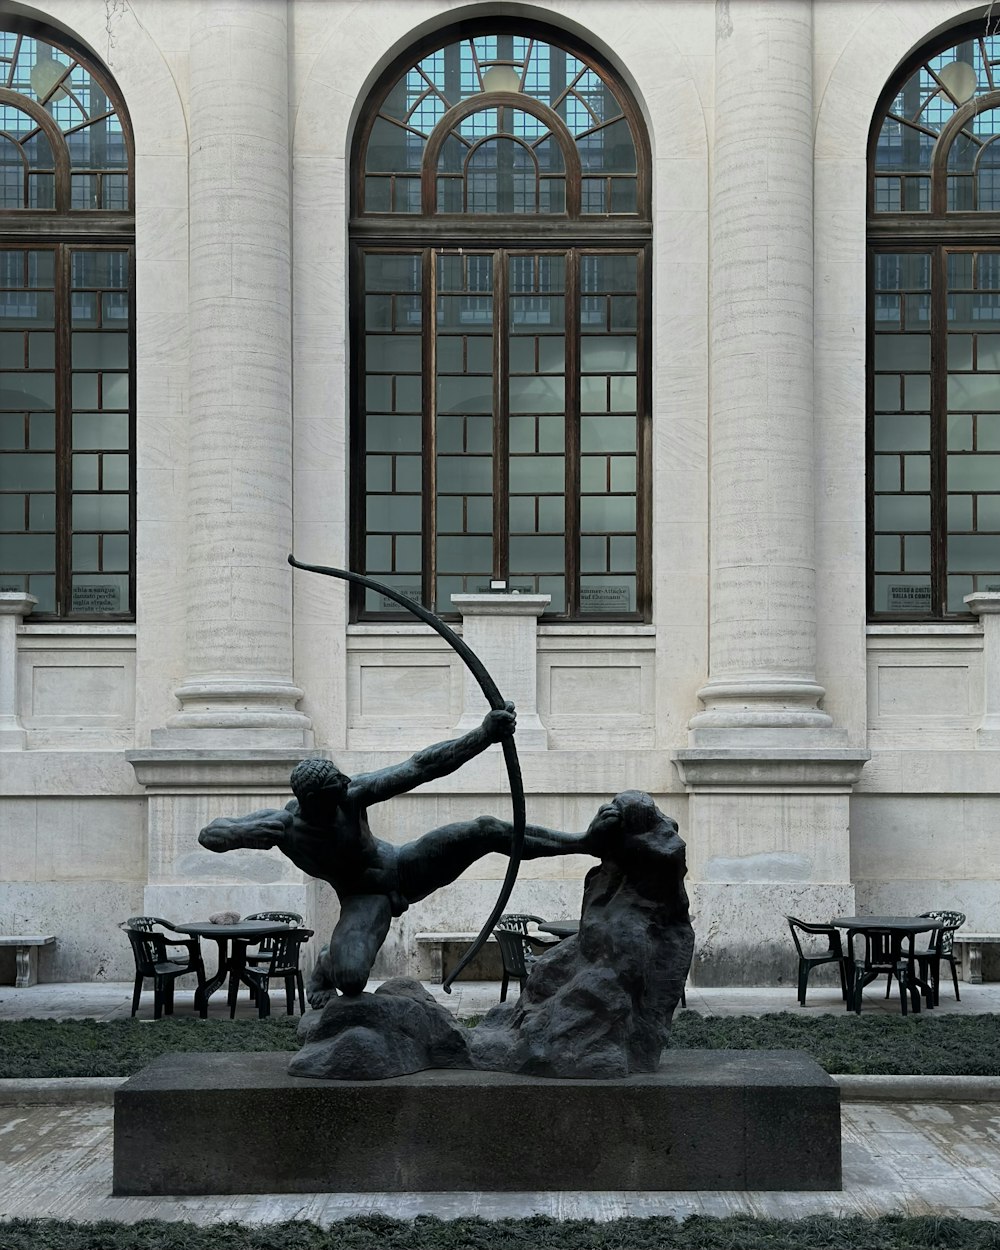 a statue of a man holding a bow and arrow in front of a building